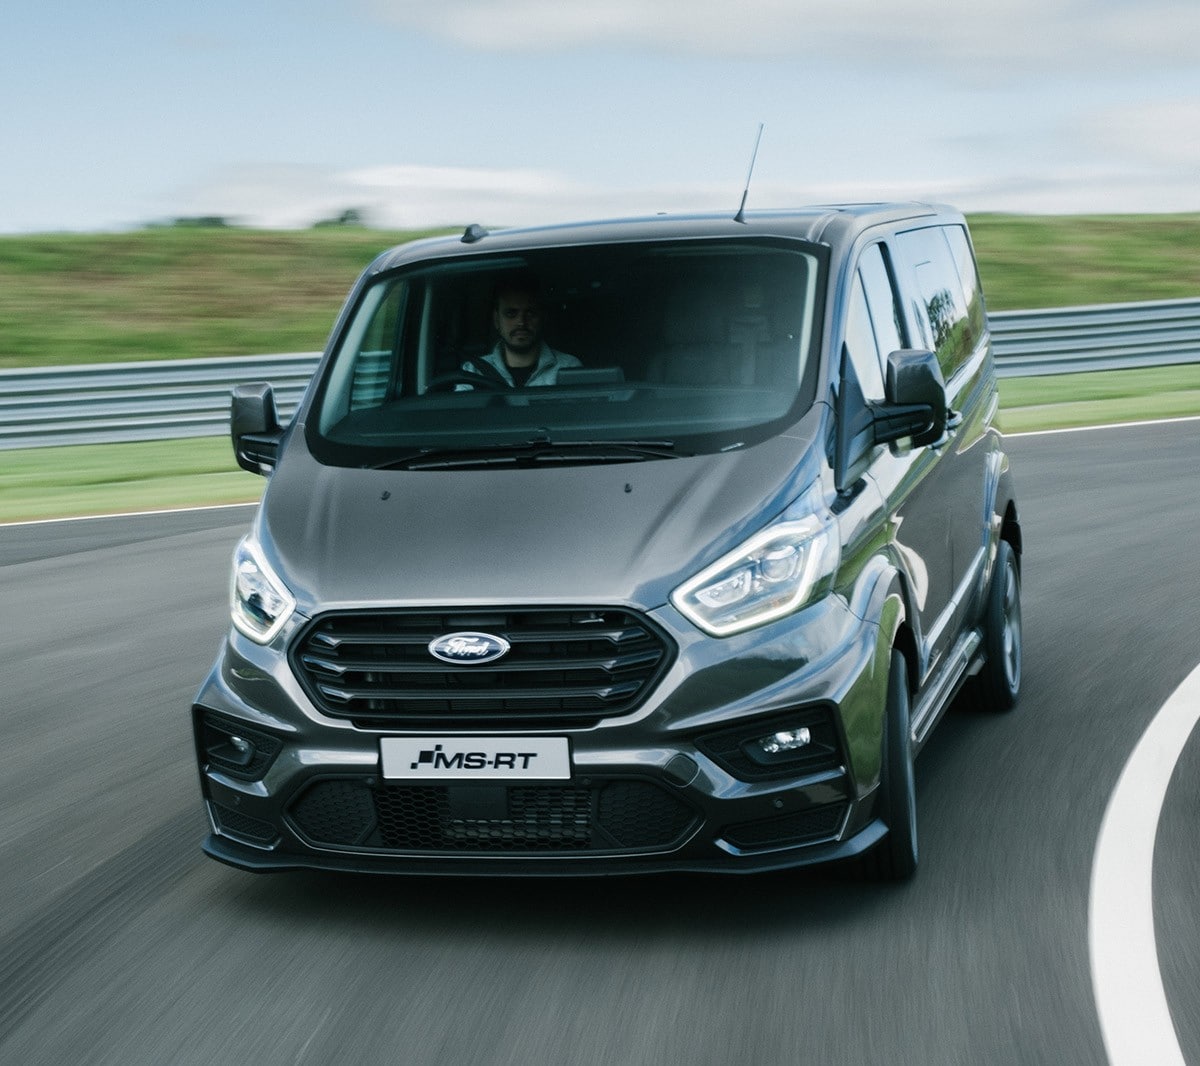 Ford Transit Custom MS-RT driving around on race track